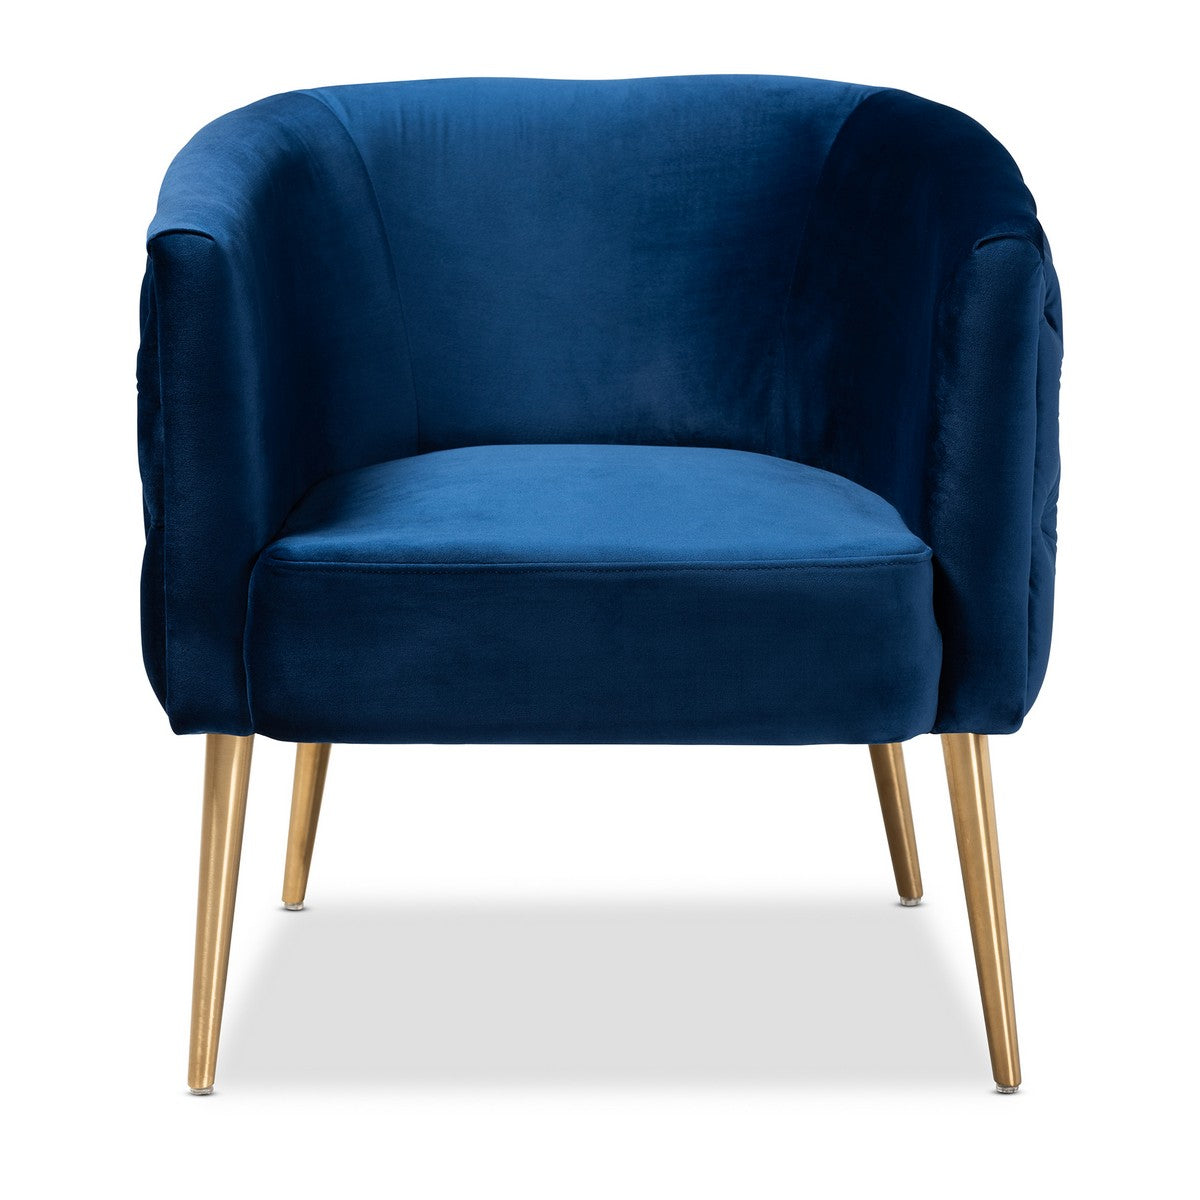 Baxton Studio Marcelle Glam and Luxe Navy Blue Velvet Fabric Upholstered Brushed Gold Finished Accent Chair Baxton Studio-chairs-Minimal And Modern - 1